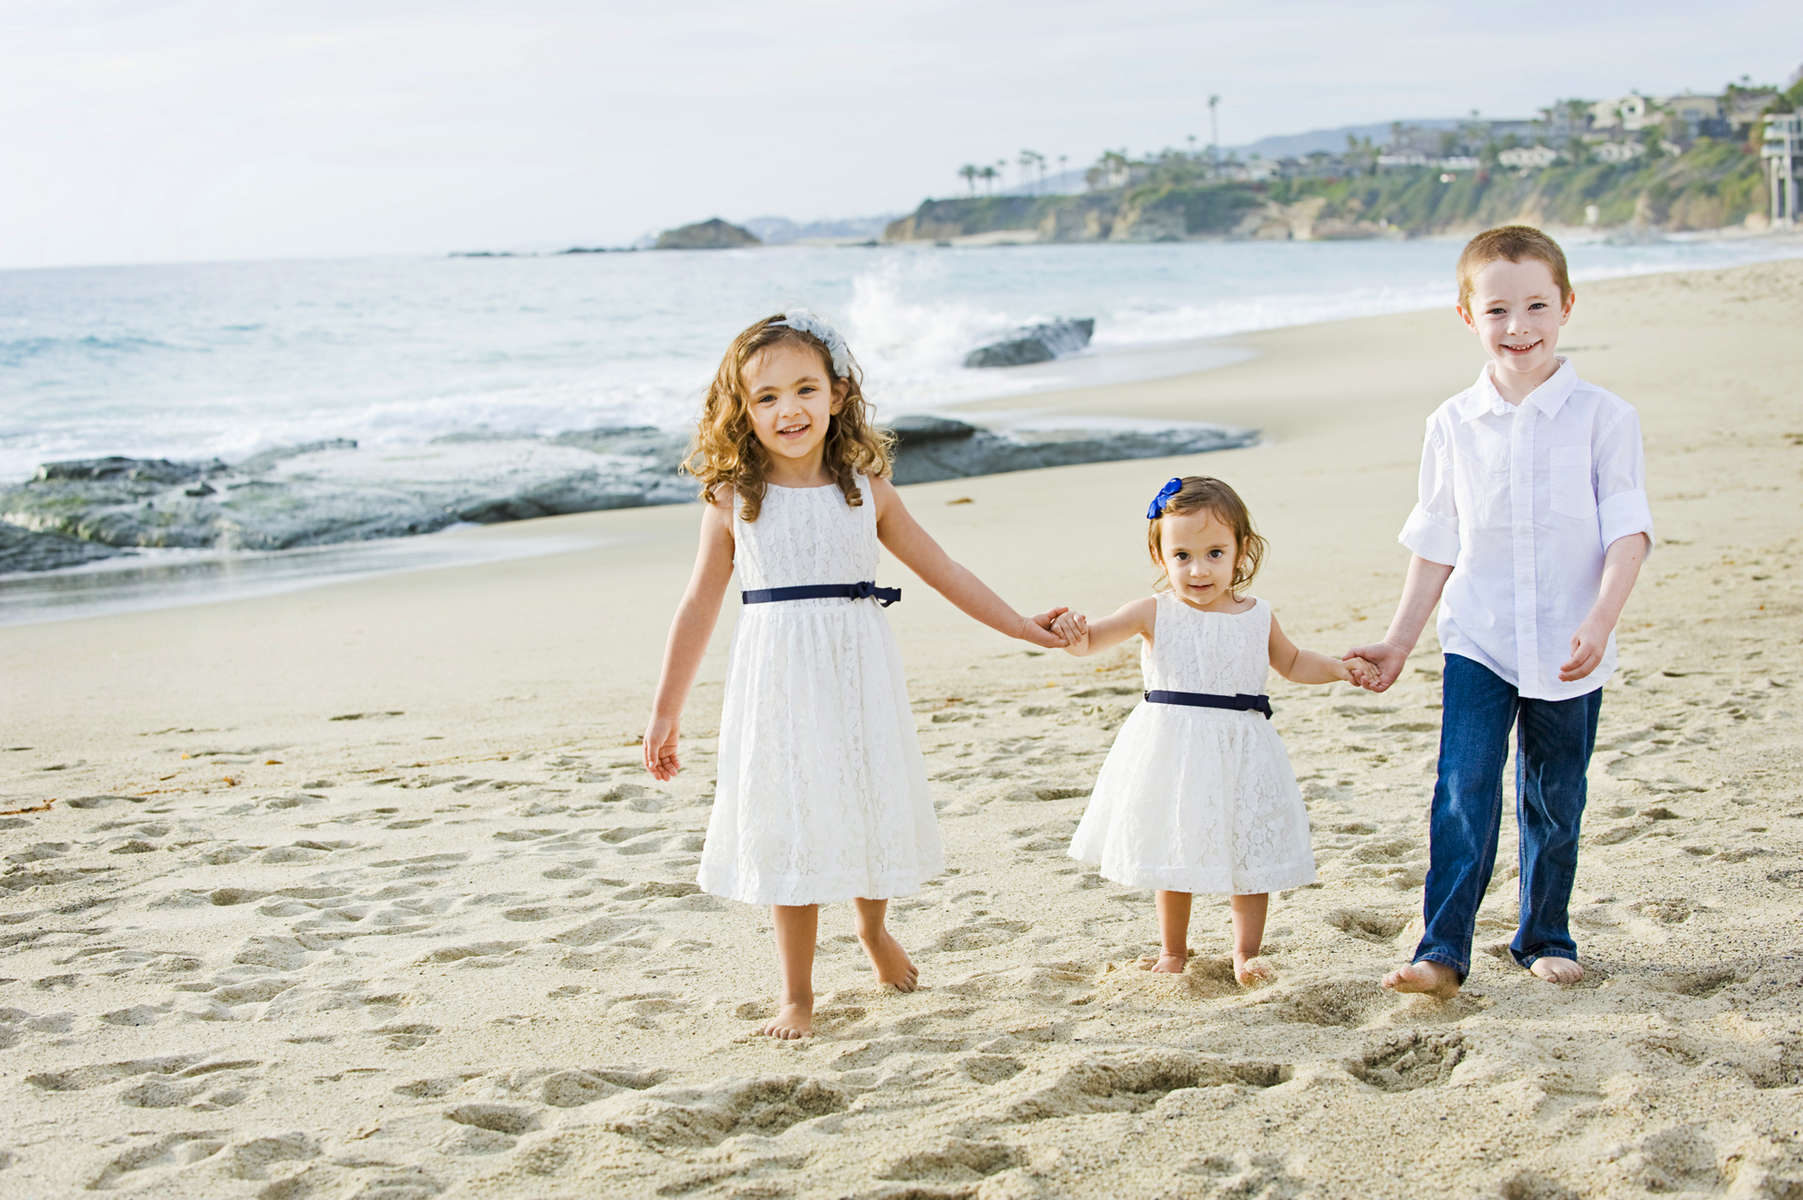 Drake Nations, 6, and his sisters, Lilah Nations, 4, and Audrey Nations, 1, from Laguna Hills, CA, loved holding hands along the sand at Aliso Beach in Laguna Beach, Calif., on Thursday, March 3, 2016.